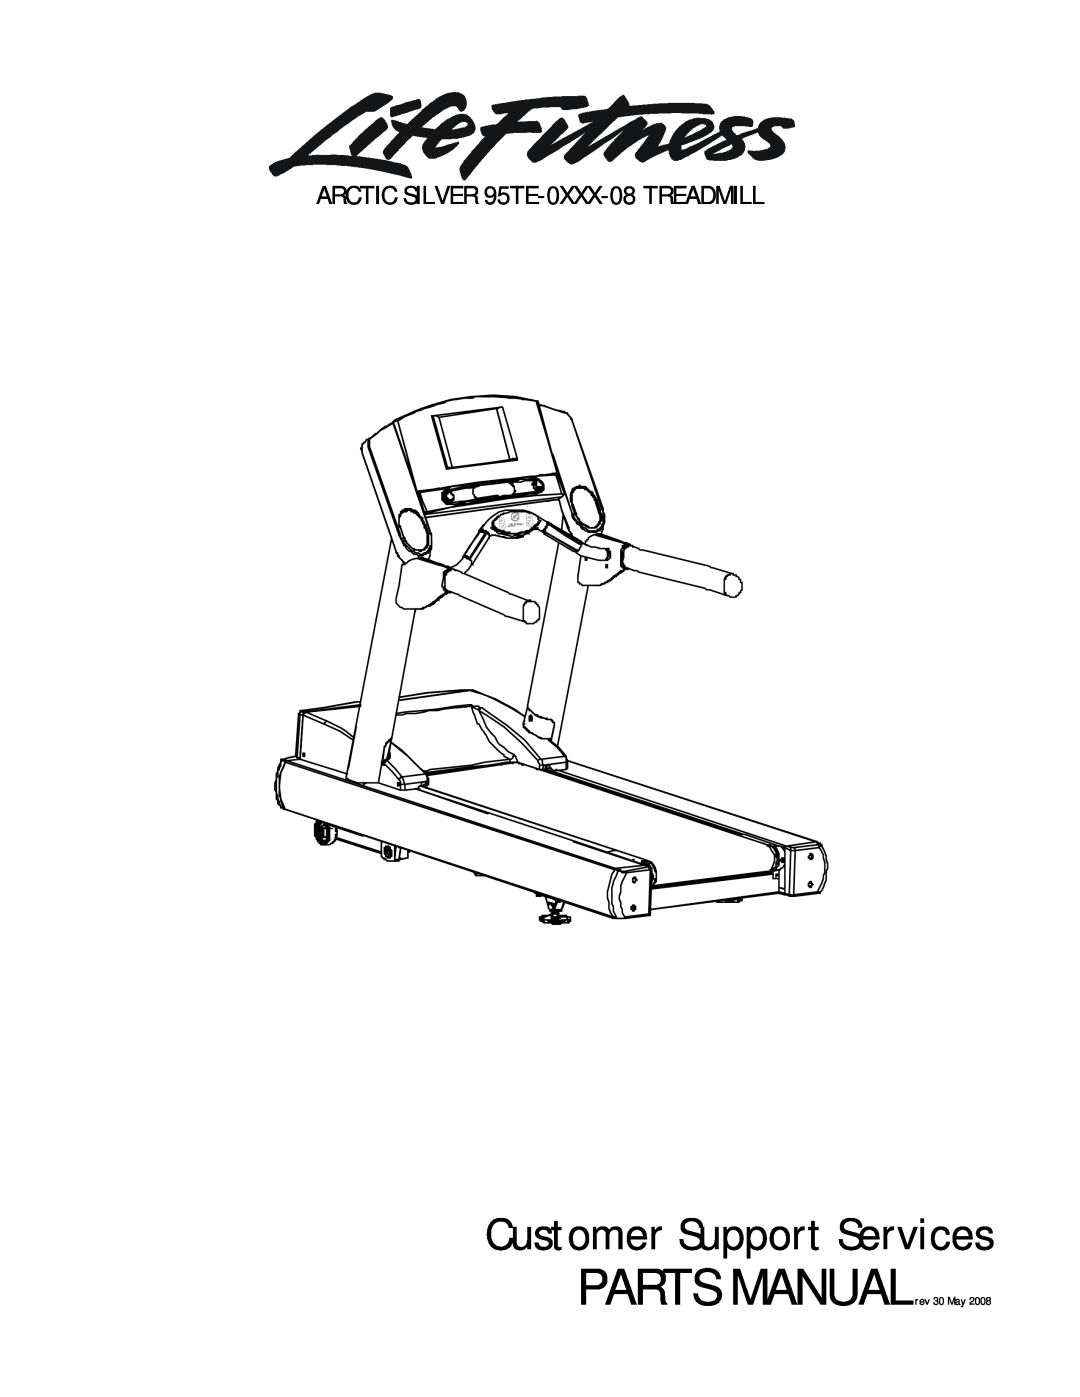 Life Fitness manual ARCTIC SILVER 95TE-0XXX-08 TREADMILL, Customer Support Services, PARTS MANUALrev 30 May 